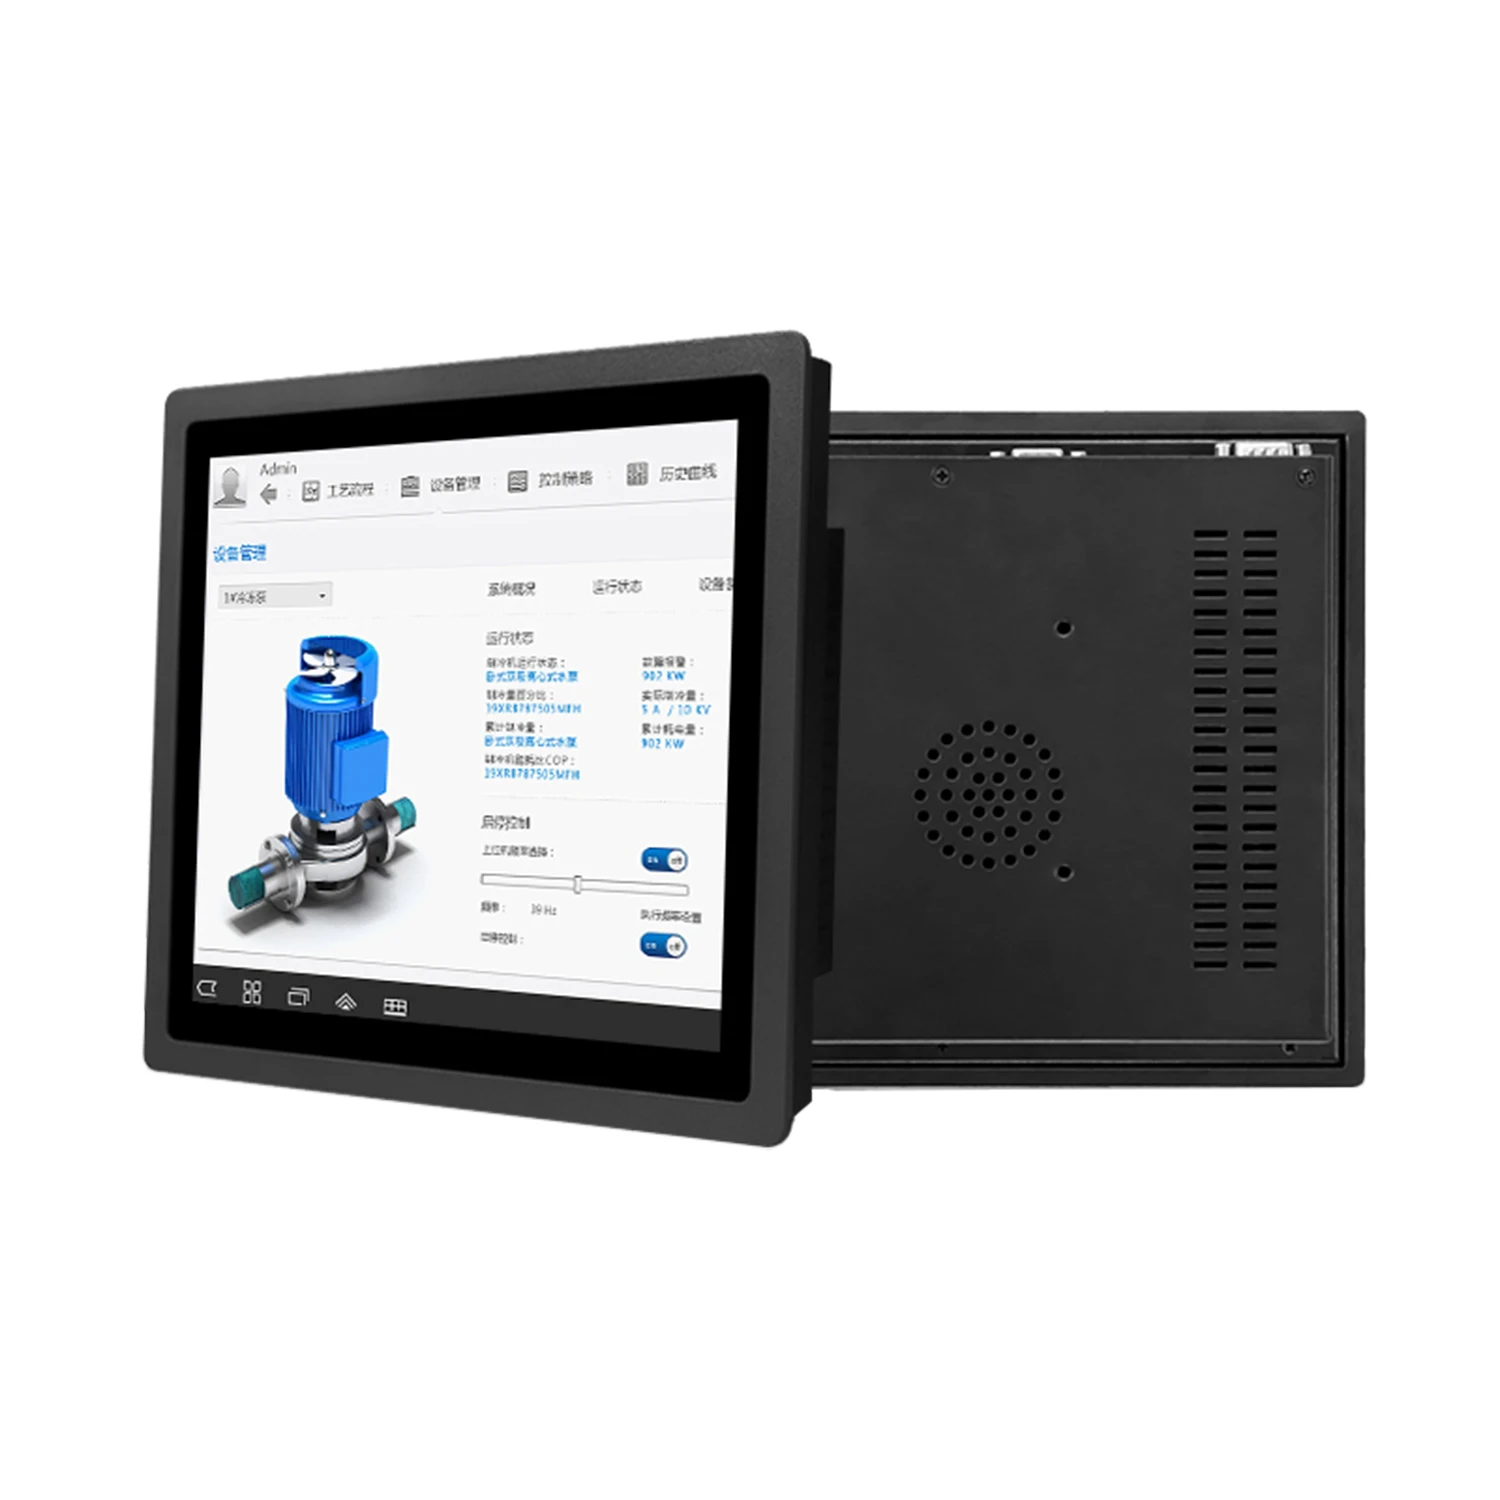 embedded Intel Core i3-7100U mini tablet computer 15 inch for win 10 Pro industrial all-in-one PC with capacitive touch screen